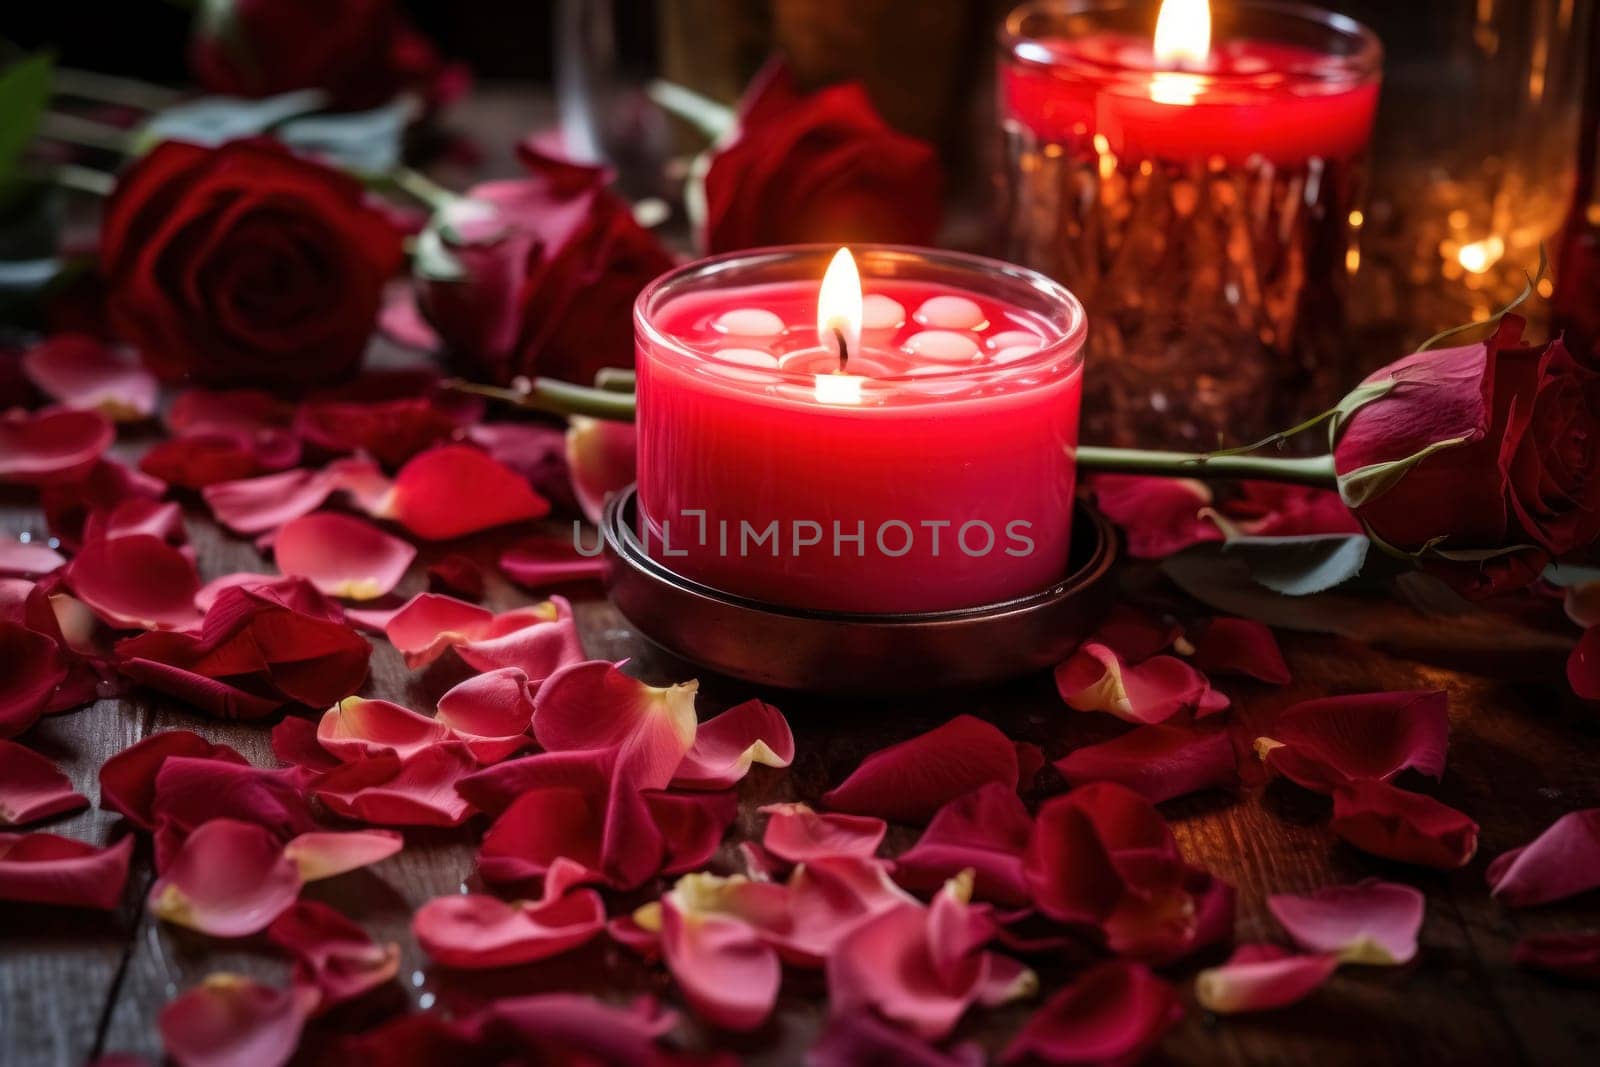 Red rose petals scattered around a burning candle, with a warm light in a cozy, romantic setting.